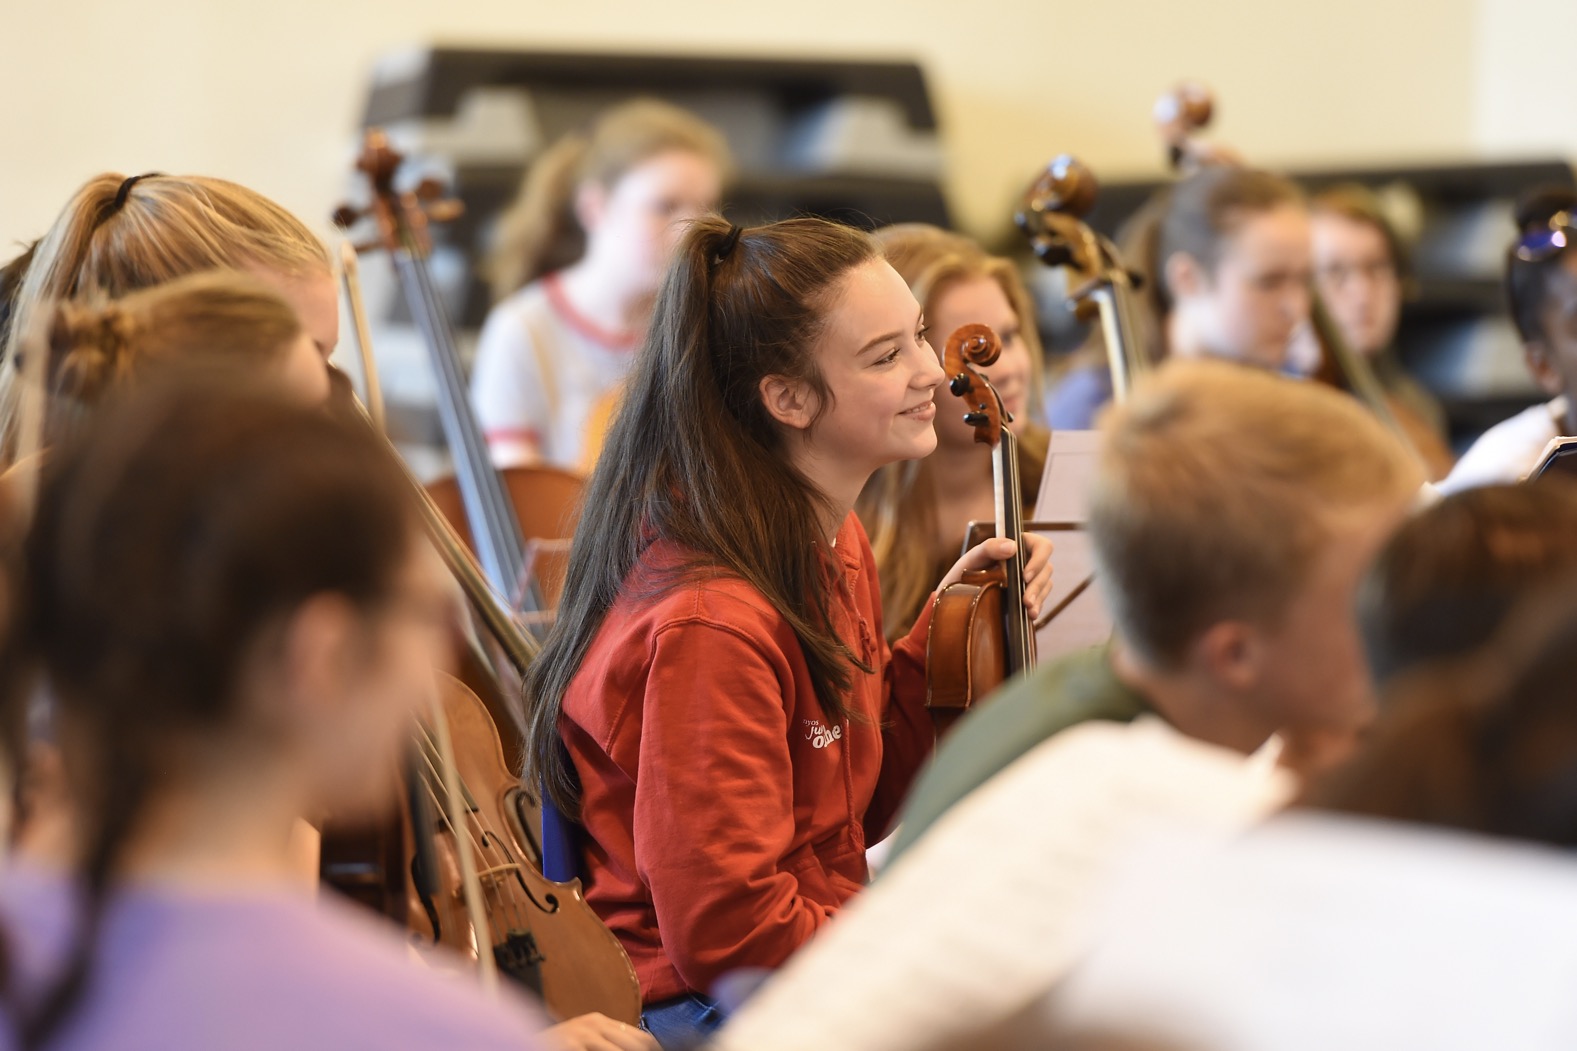 All smiles as orchestra members enjoy a short masterclass from Nicola Benedetti, July 2018